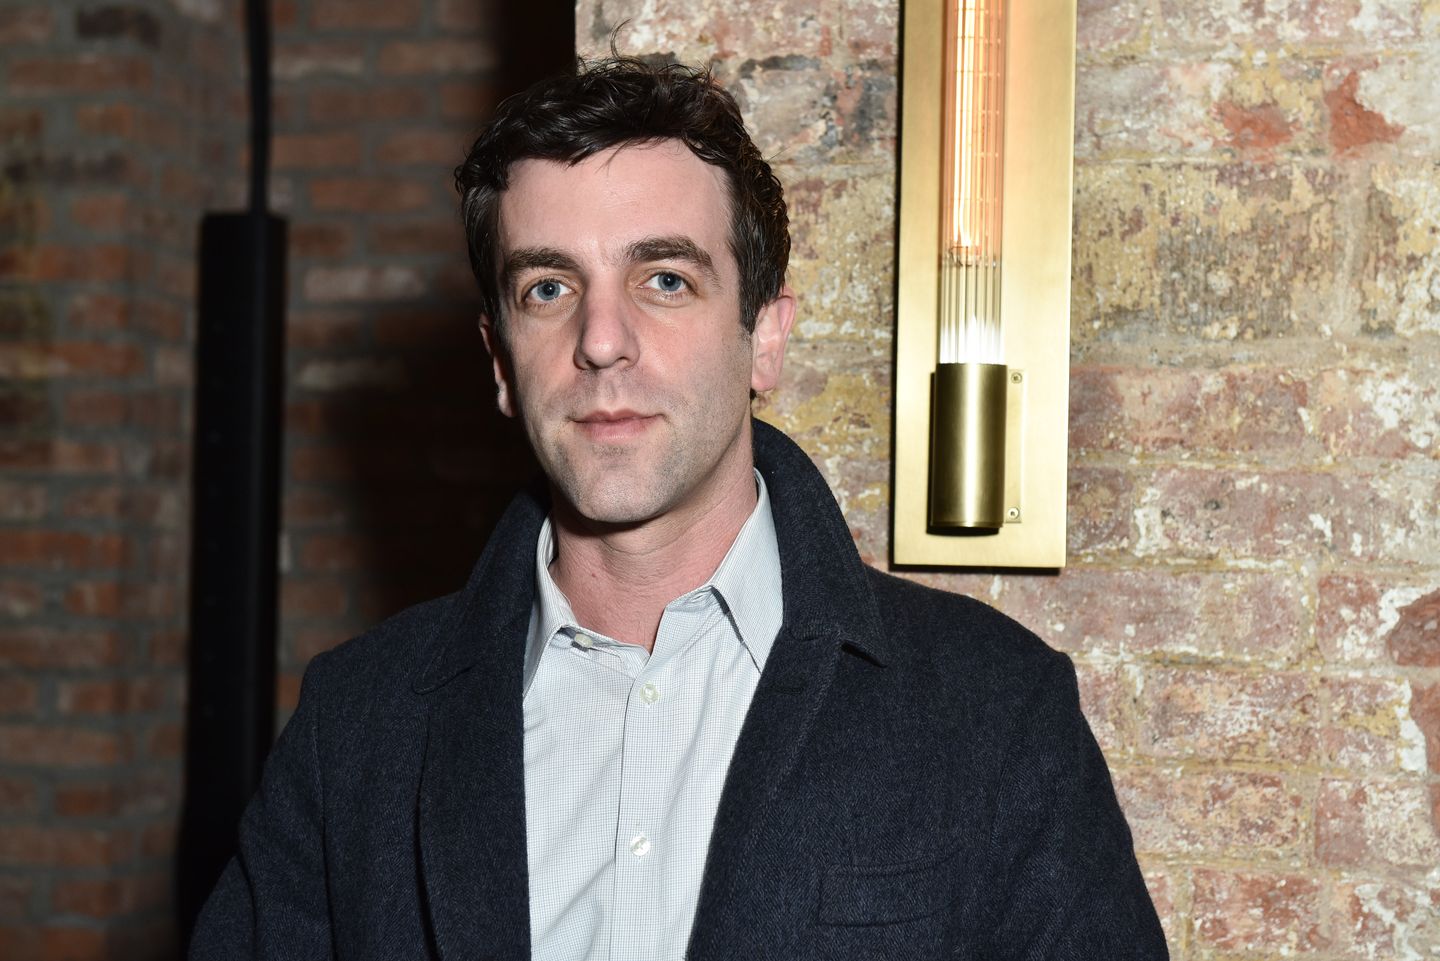 B. J. Novak attends Billy Reid - Front Row - NYFW: Men's at The Cellar at The Beekman on January 30, 2017 in New York City. (Photo by Jared Siskin/Patrick McMullan via Getty Images)